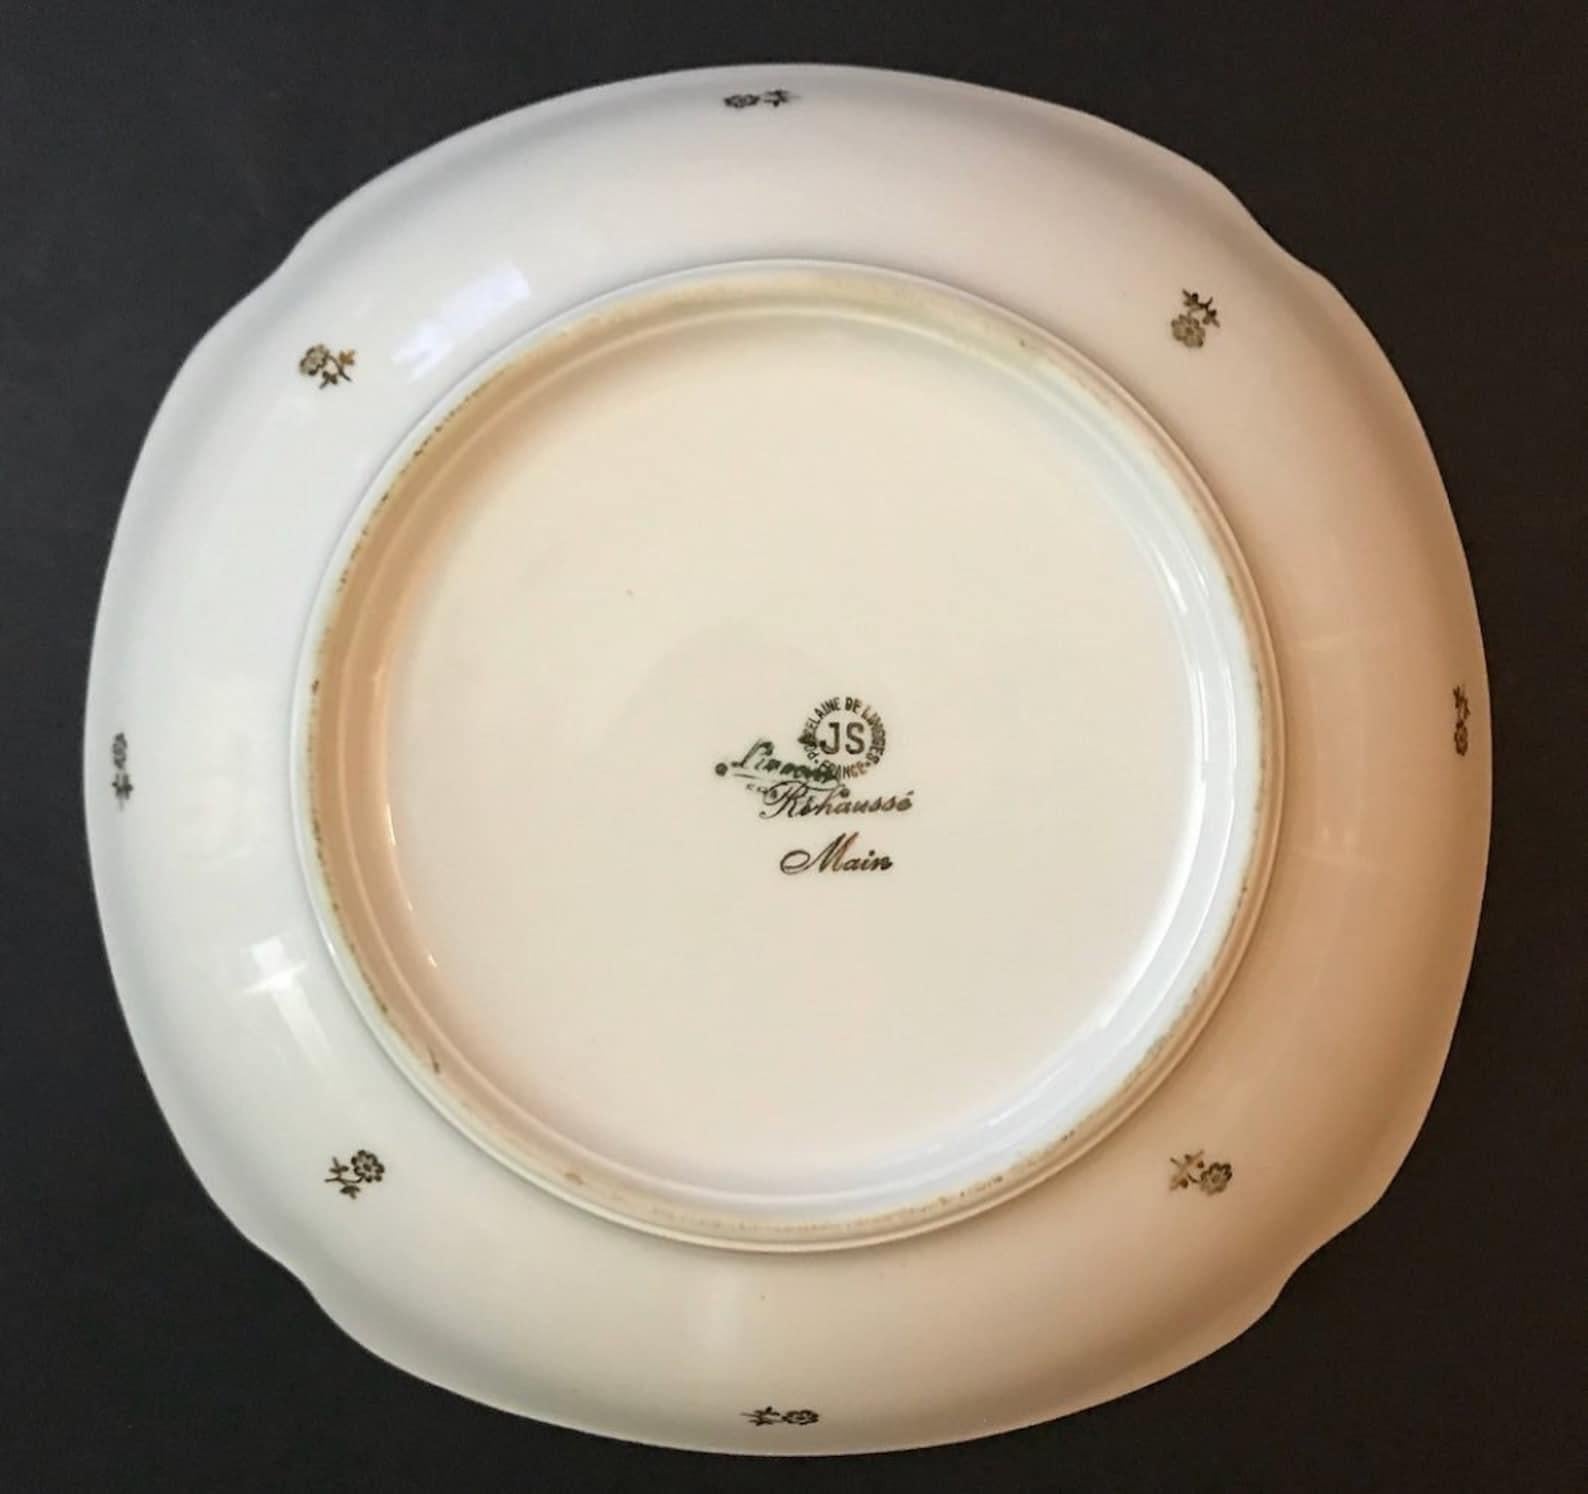 A deep dish made by Limoges porcelain, France.

Hand-painted vintage item in porcelain.

Stamped, artist’s signature on the buttom.

In excellent vintage condition. No chips, cracks or crazings.

Diameter: 9.5 inc (24 cm).

Depth:       2 inc    (5